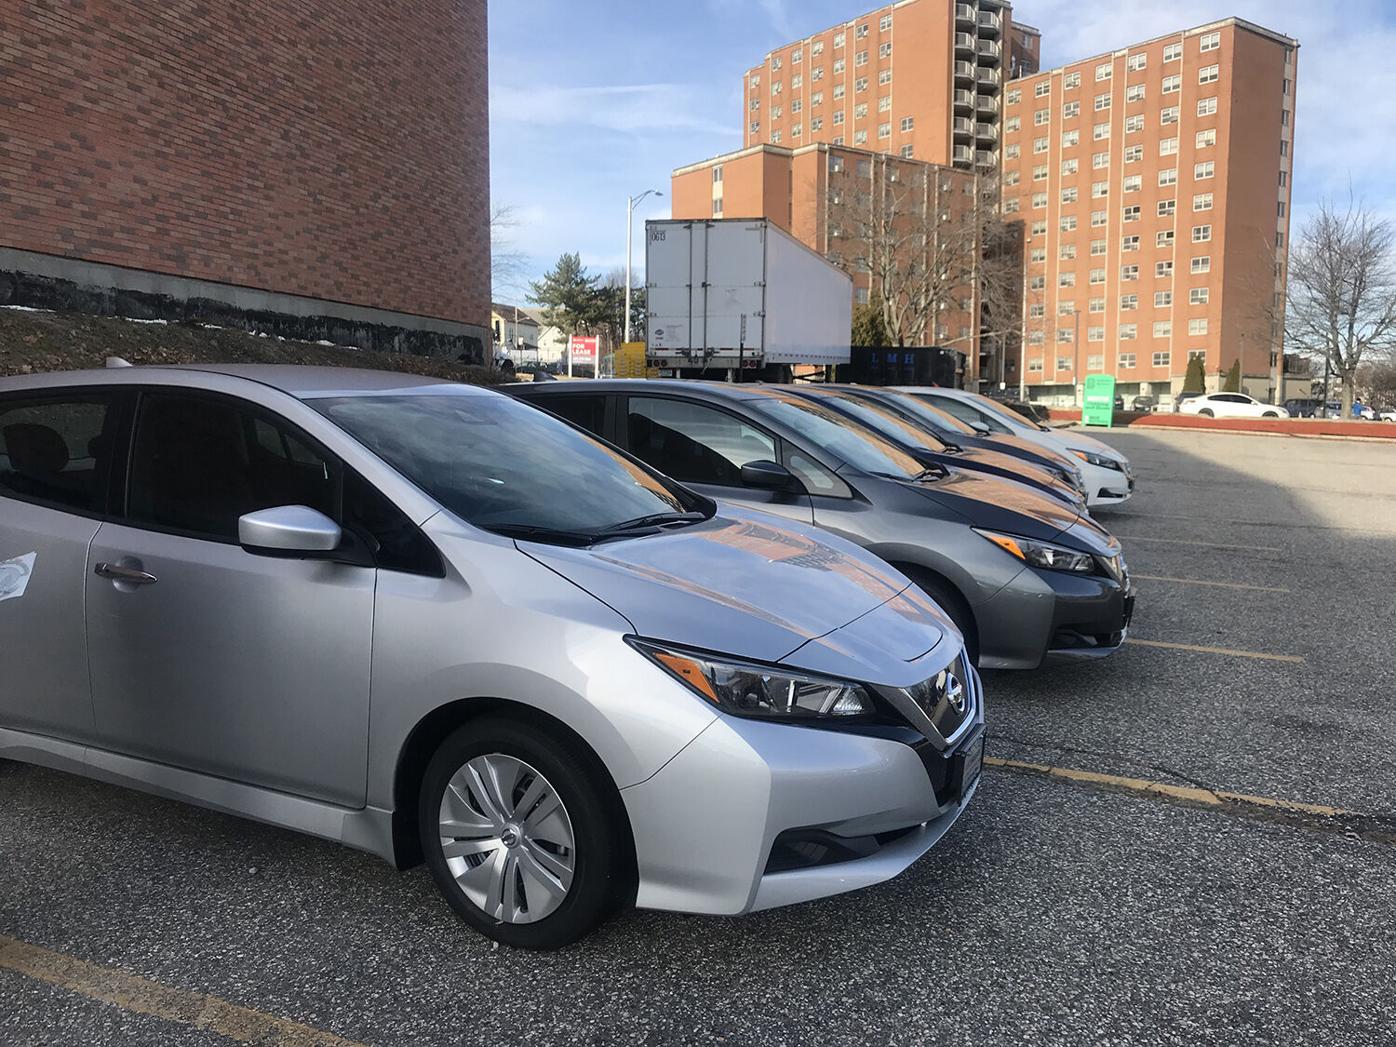 Pawtucket's new electric vehicles